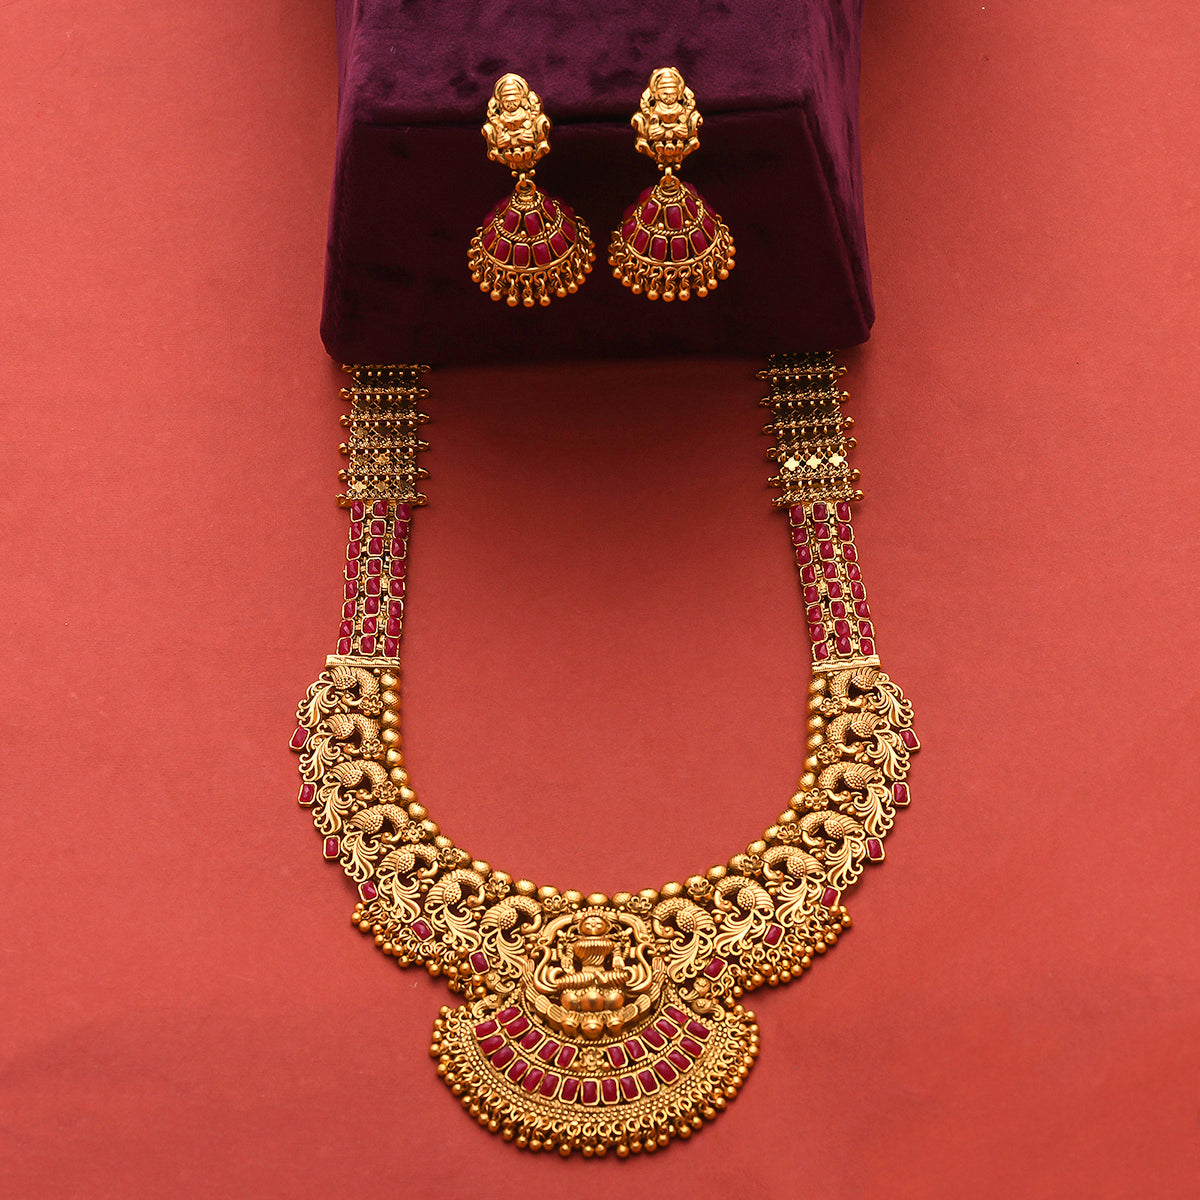 Women's Antique Inspired Gold Toned Cz Adorned Brass Temple Jewellery Set - Voylla